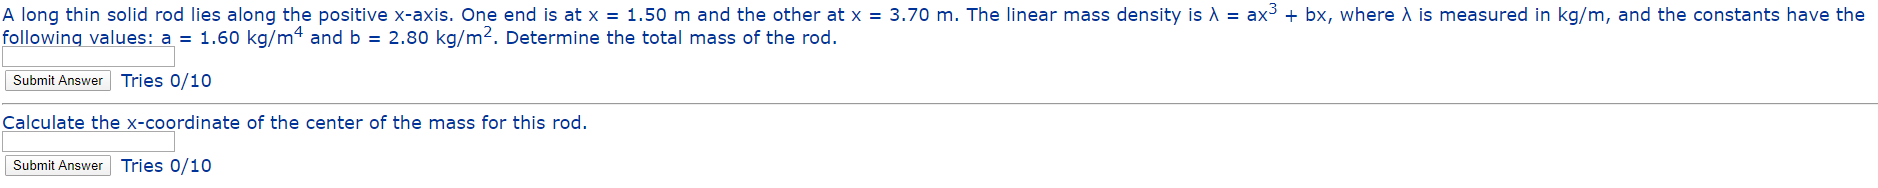 A long thin solid rod lies along the positive x-axis. One end is at x = 1.50 m and the other at x = 3.70 m. The linear mass density is A = ax3 + bx, where A is measured in kg/m, and the constants have the
following values: a = 1.60 kg/m4 and b = 2.80 kg/m². Determine the total mass of the rod.
Submit Answer Tries 0/10
Calculate the x-coordinate of the center of the mass for this rod.
Submit Answer Tries 0/10
